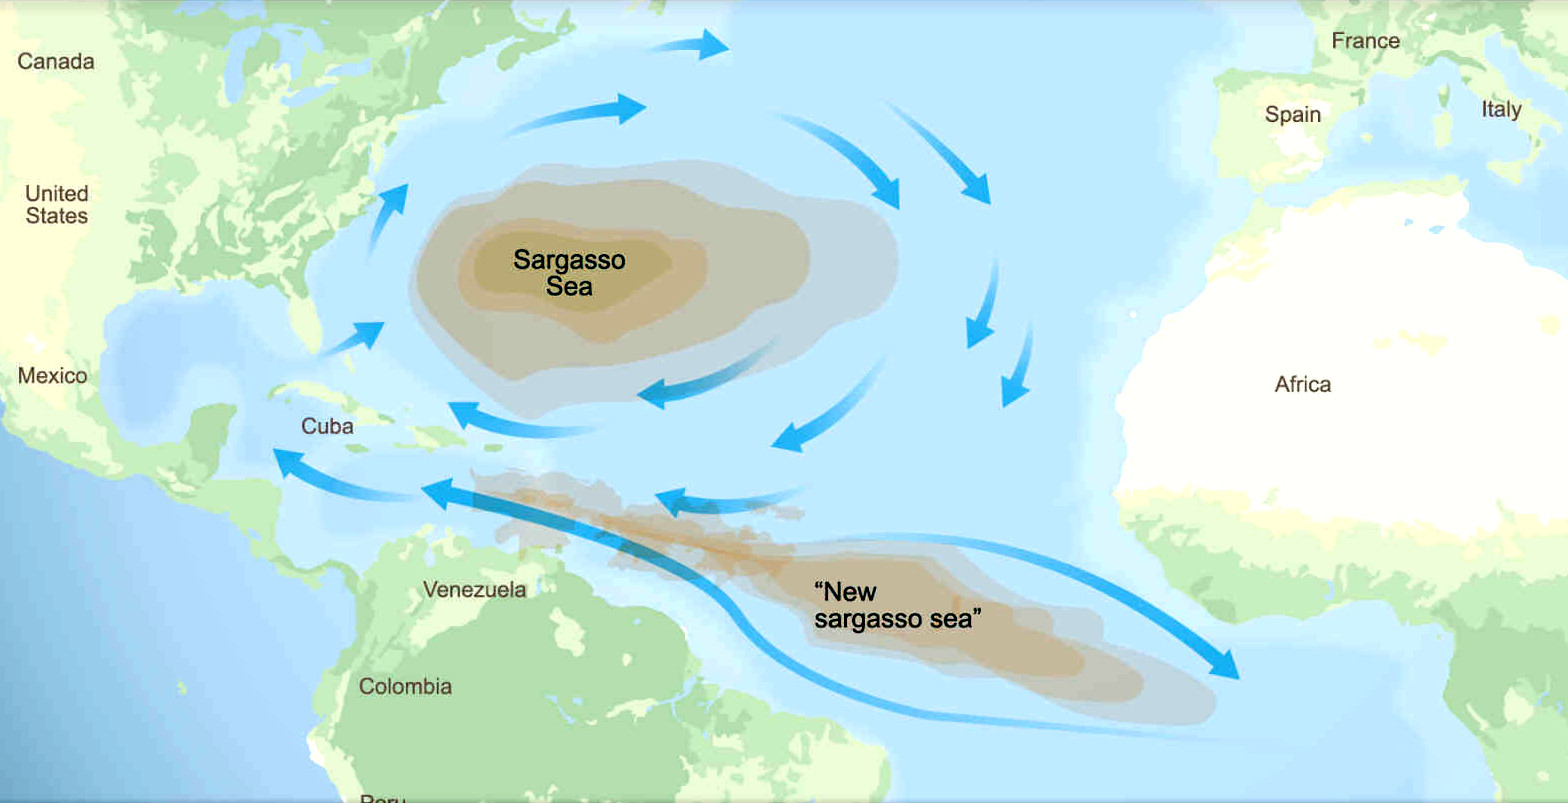 Map of the Sargasso and New Sargasso seas in the North and Equatorial Atlantic